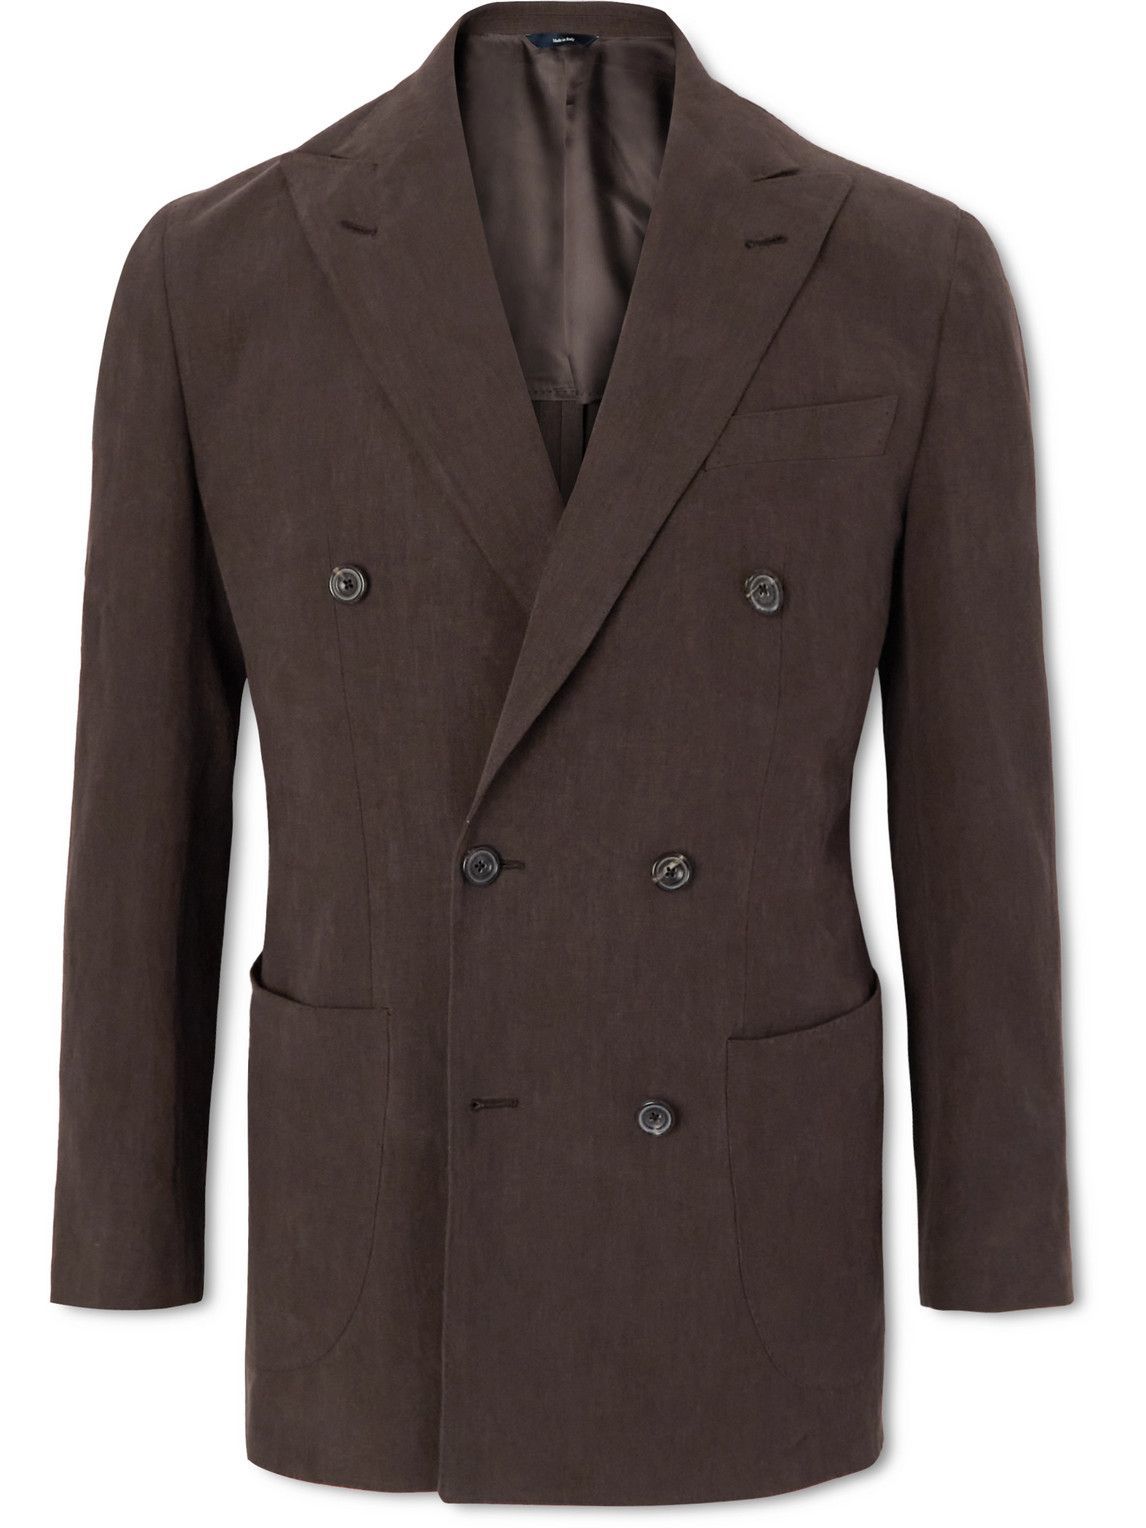 Thom Sweeney - Double-Breasted Linen Suit Jacket - Brown Thom Sweeney